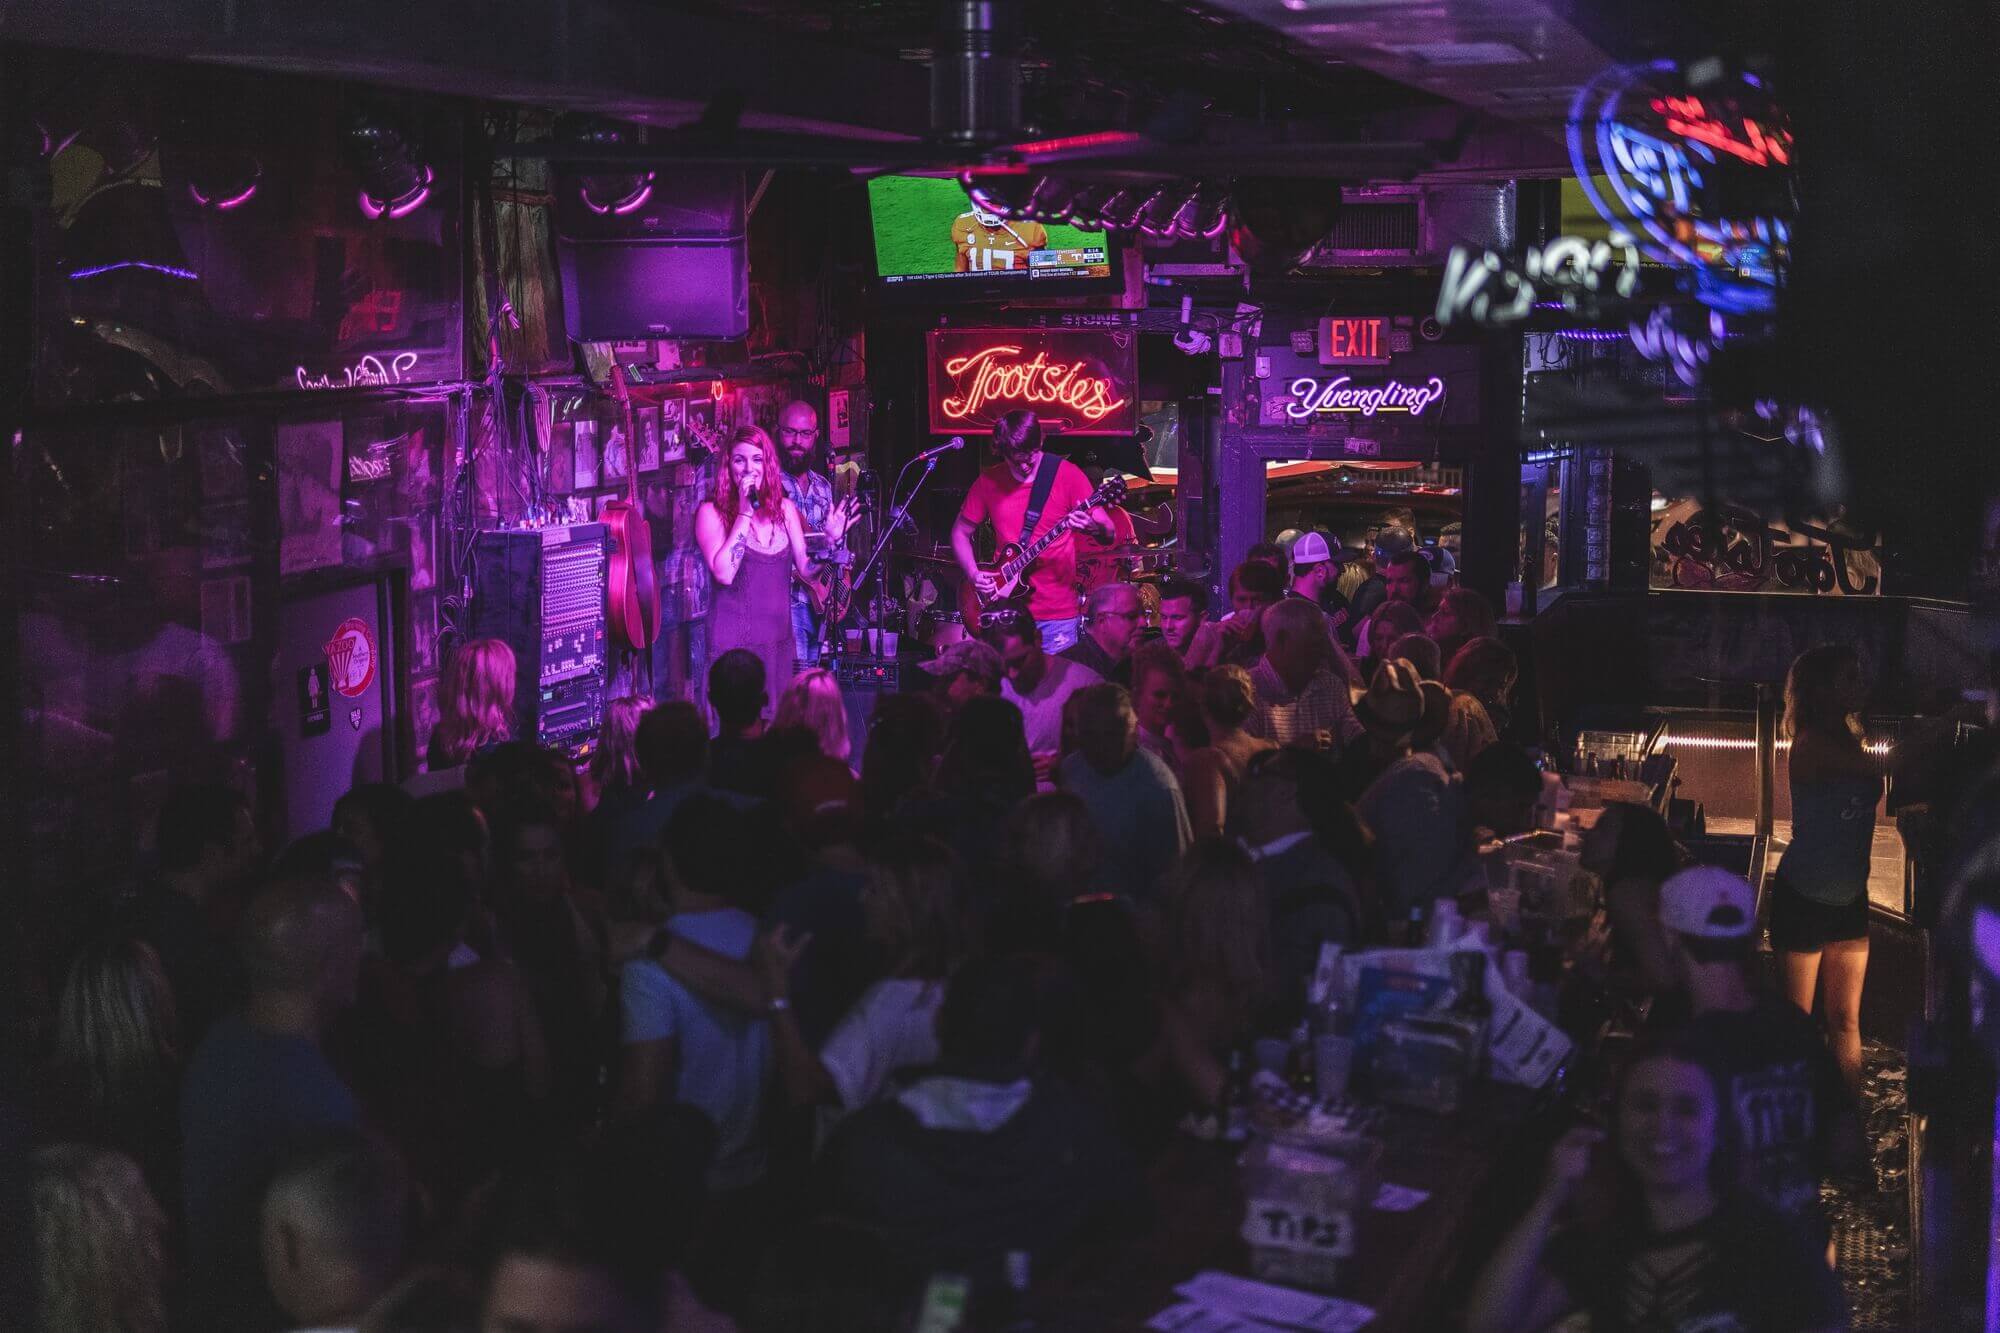 Live music and people having fun in tootsies in nashville | FlyCheapAlways